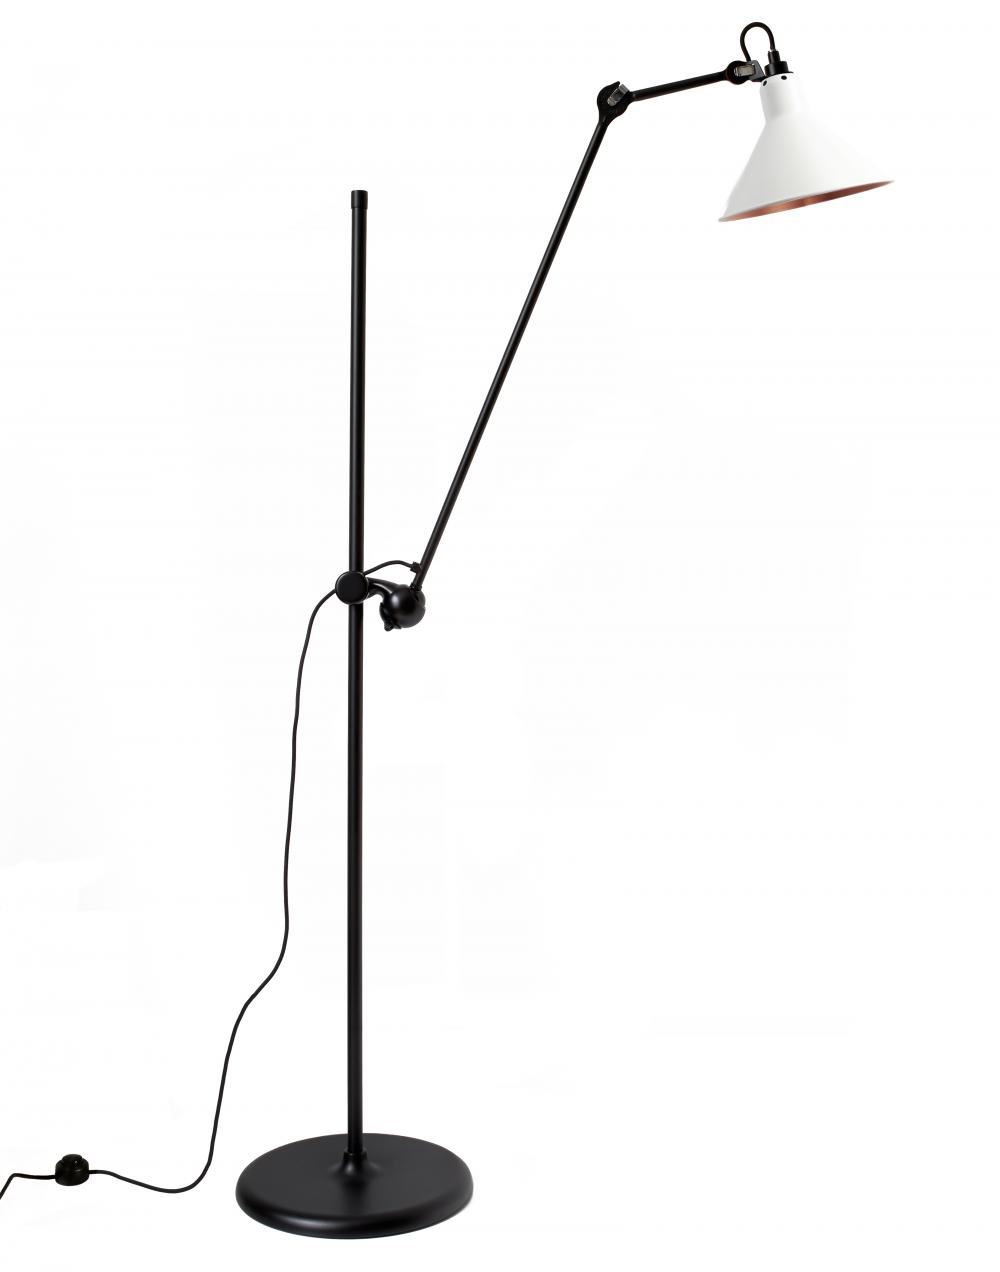 Lampe Gras 215 Floor Lamp White Shade With Copper Interior Black Body Conical Shade